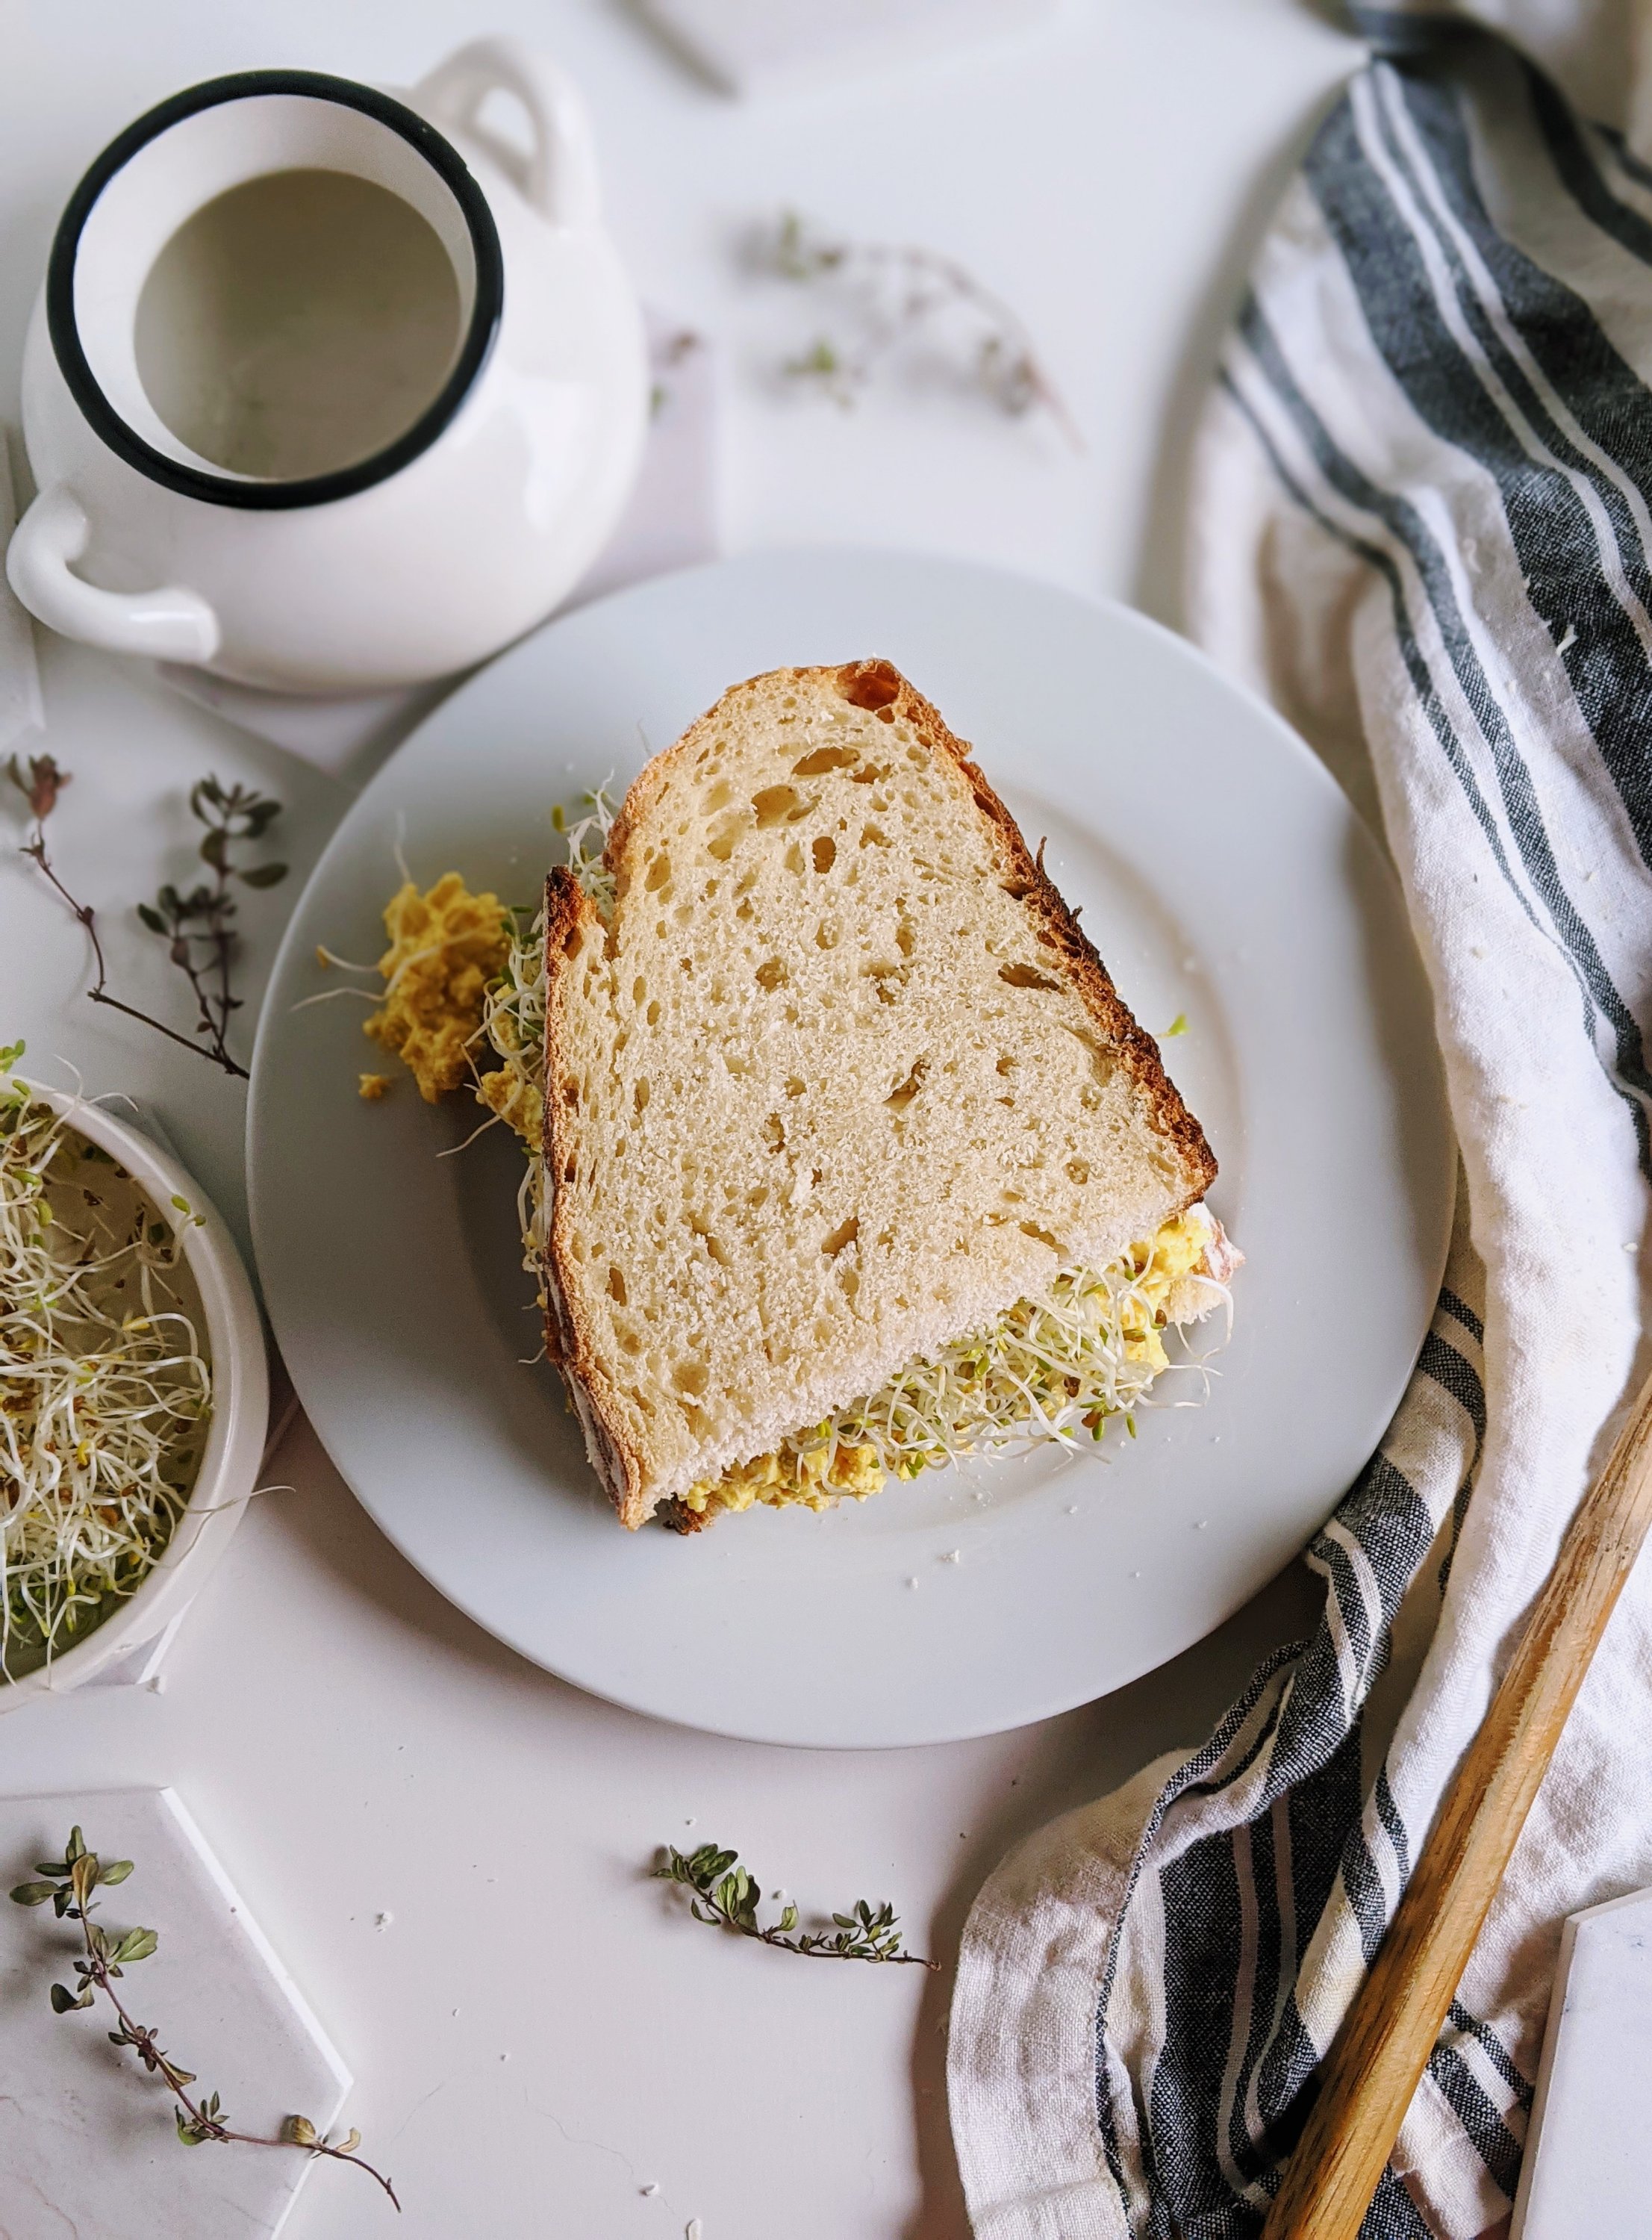 vegan egg salad sandwich with tofu recipe and turmeric sourdough bread homemade ealthy meal prep batch cook make ahead sandwich recipes for work or school lunches